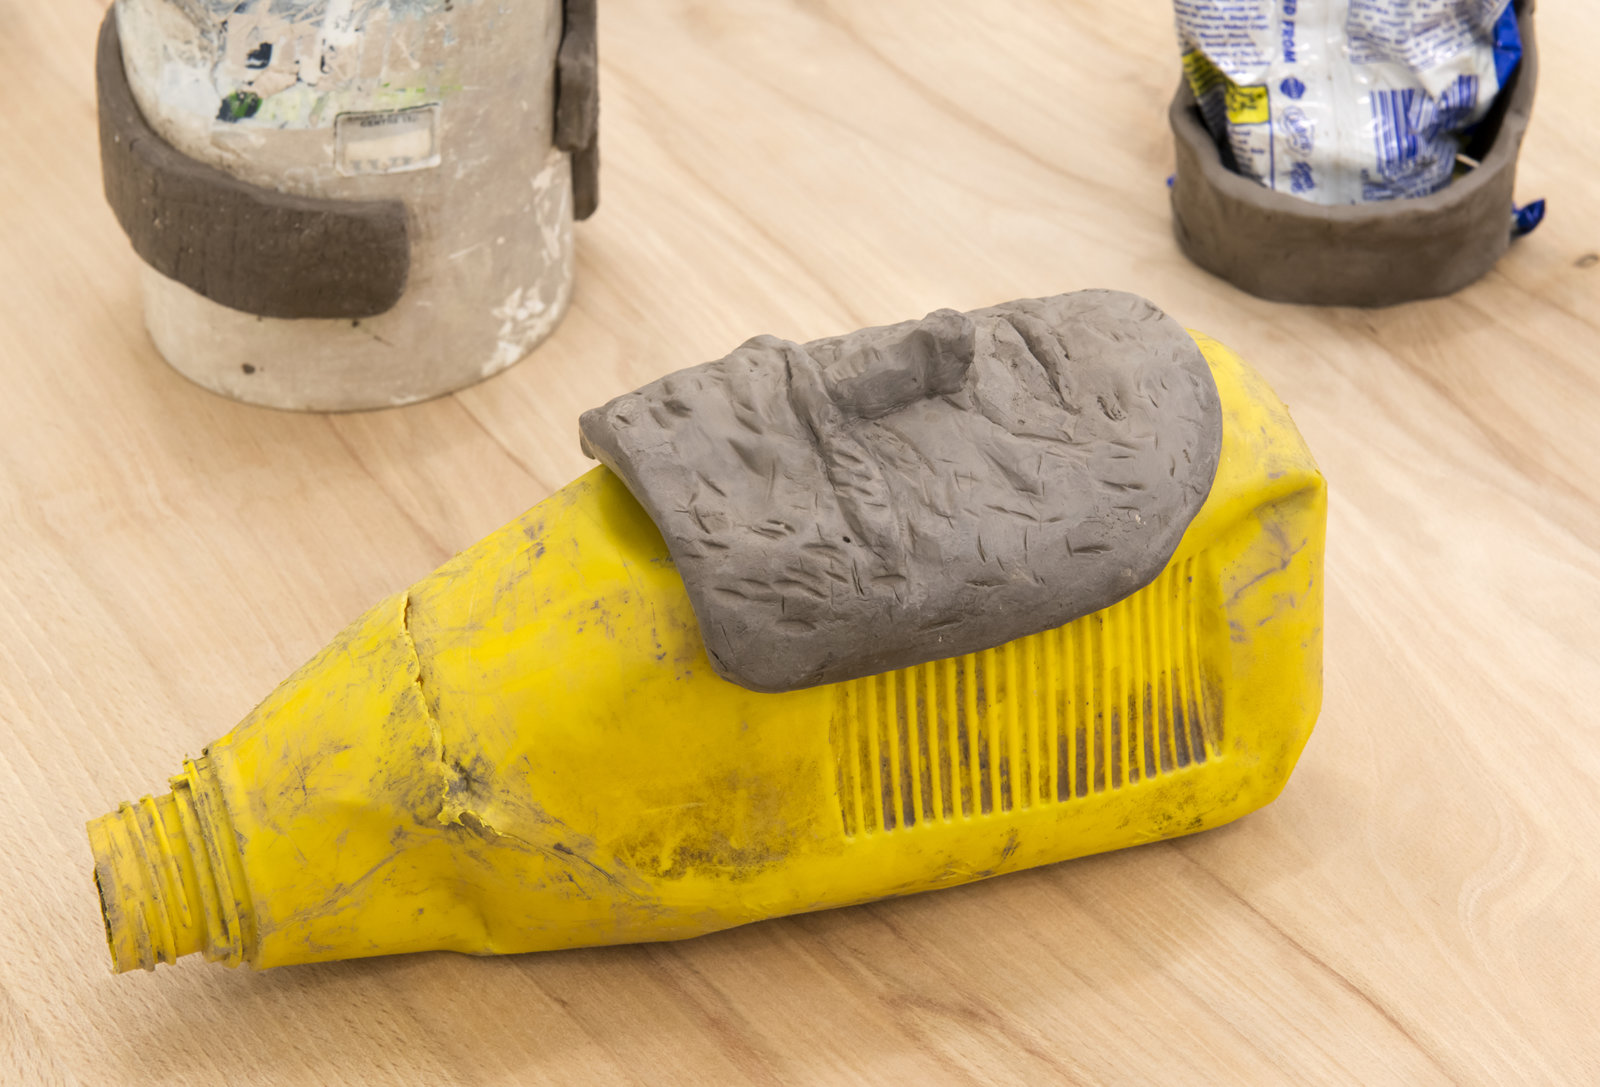 Ashes Withyman, Funeral Vessels (detail), 2014, found objects and unfired clay dredged from the Forth and Clyde canal, Glasgow, 40 x 96 x 23 in. (100 x 243 x 58 cm)